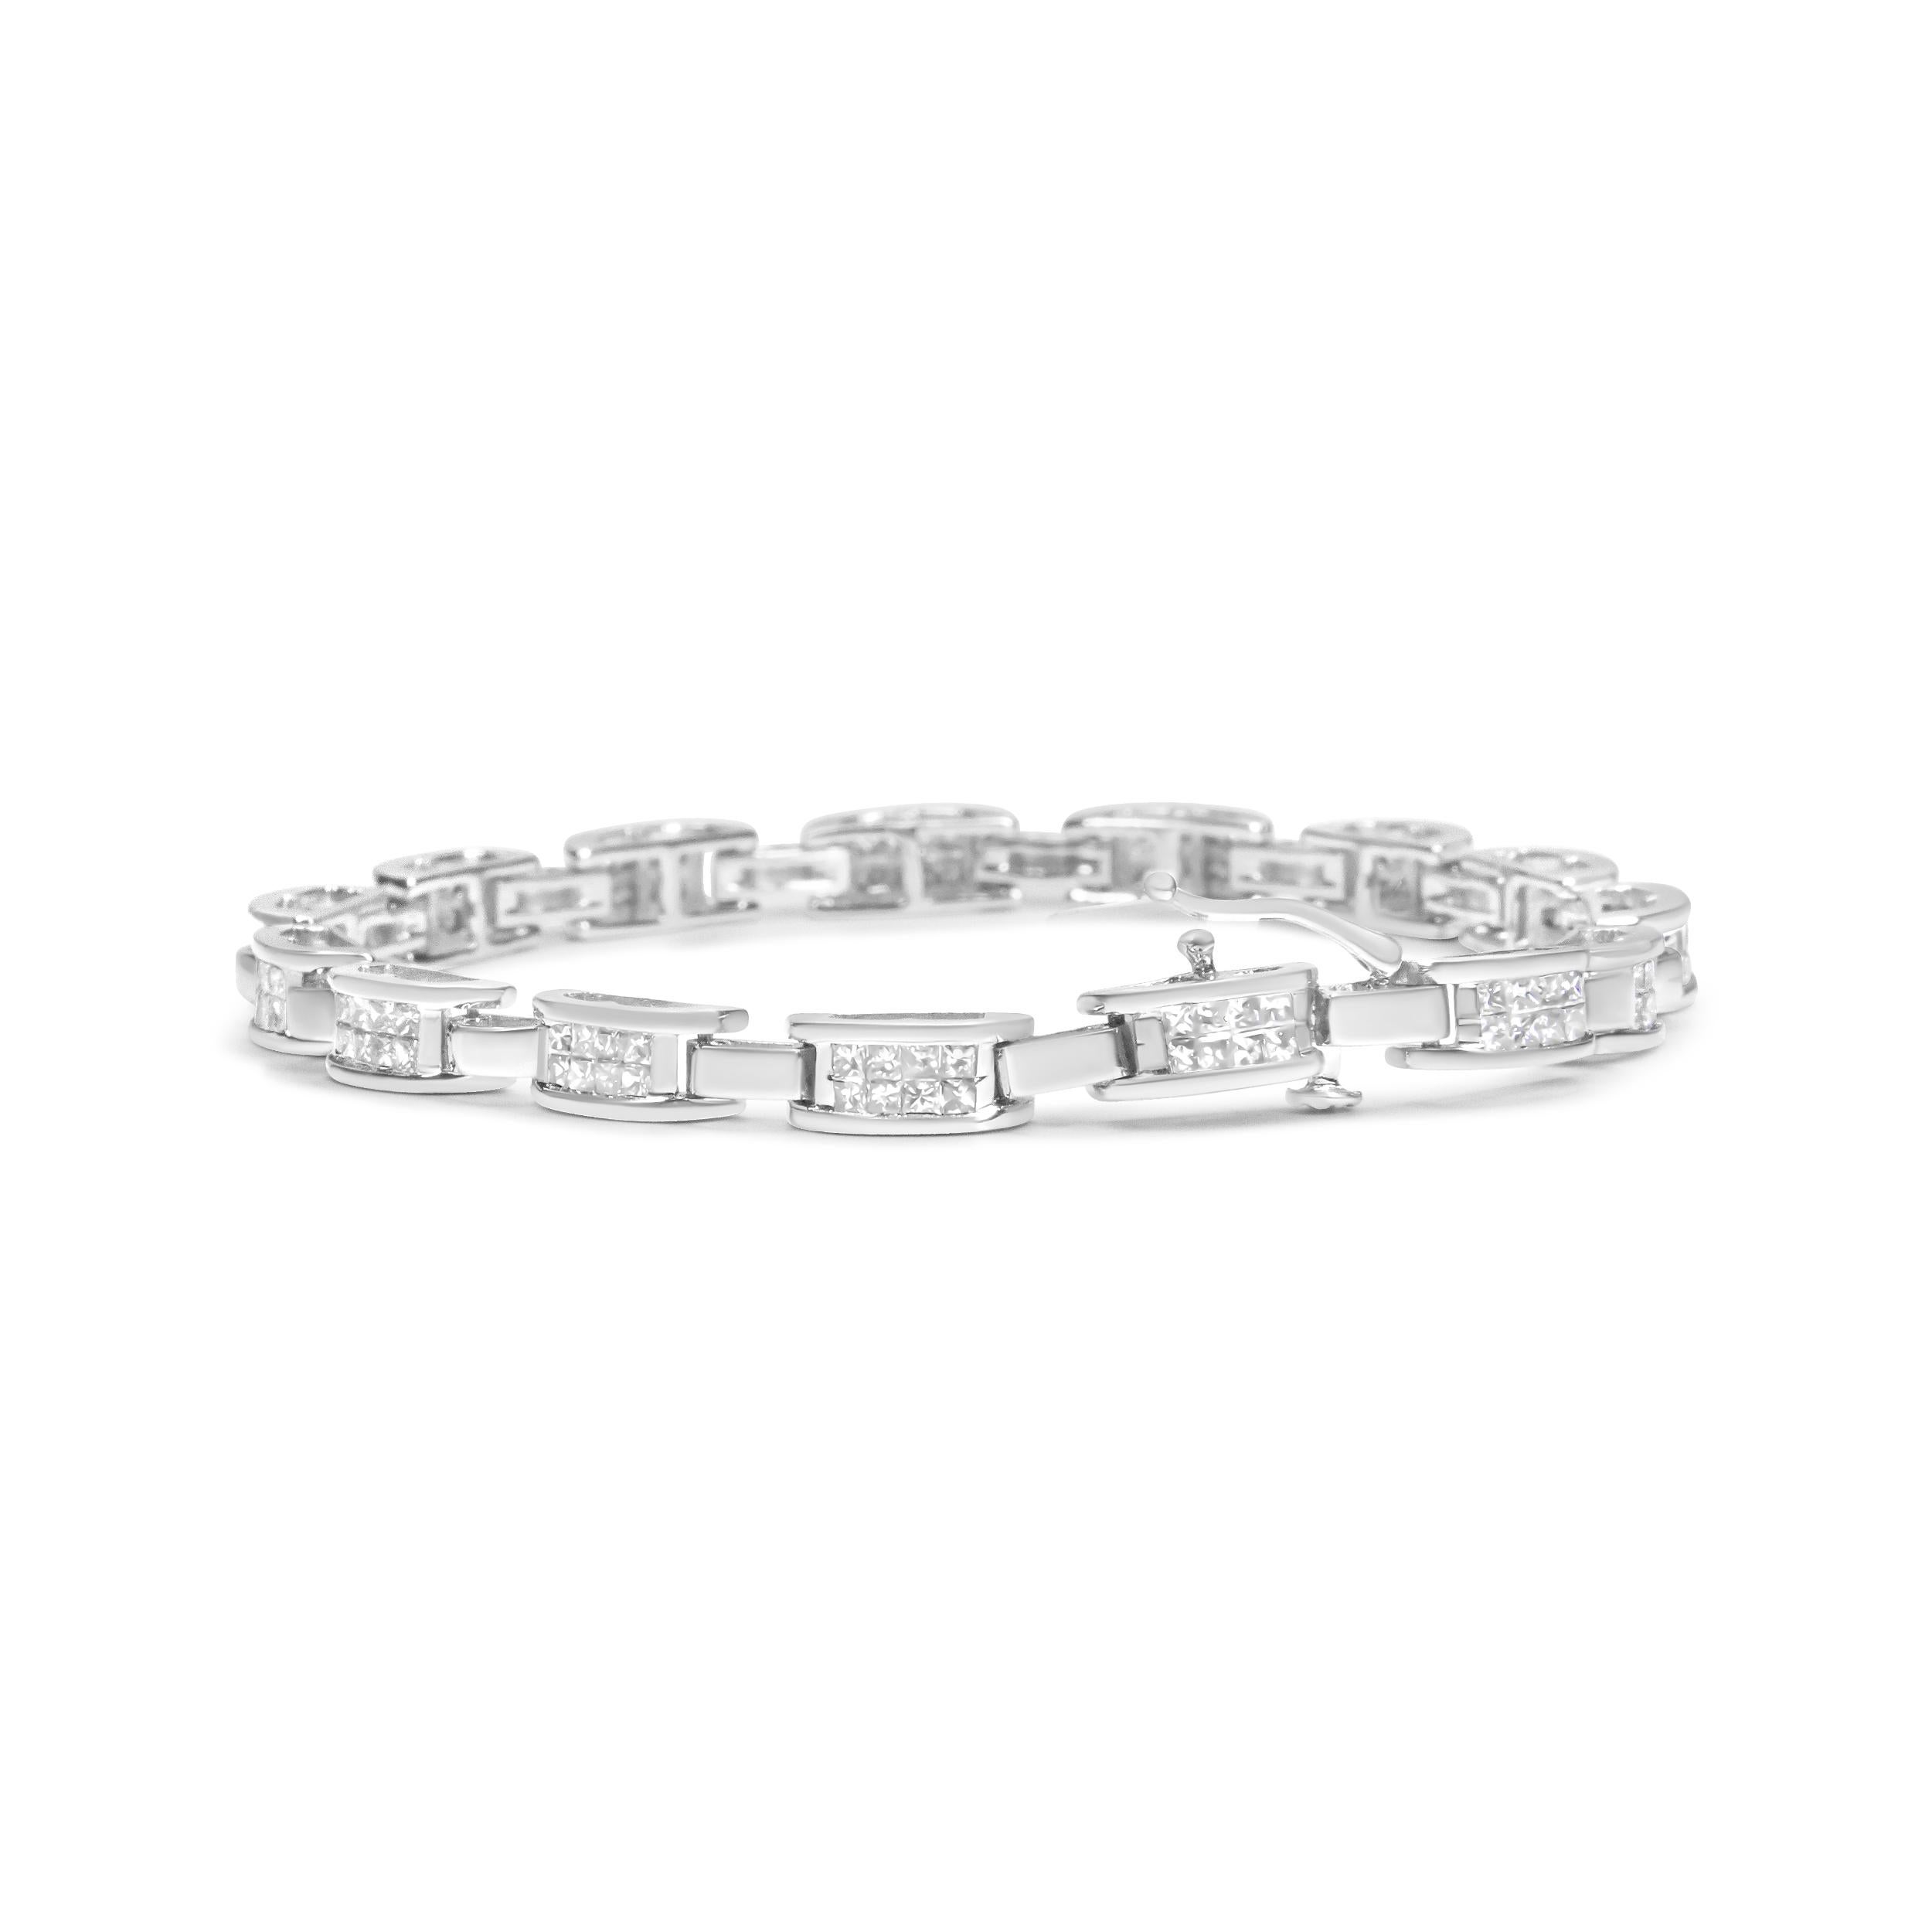 Let your beauty and style ring clear in this stunning invisible-set diamond link bracelet for her! This exceptional bracelet is a work of fine craftsmanship in genuine 14k white gold with sparkling white diamonds of a total 2 cttw with an